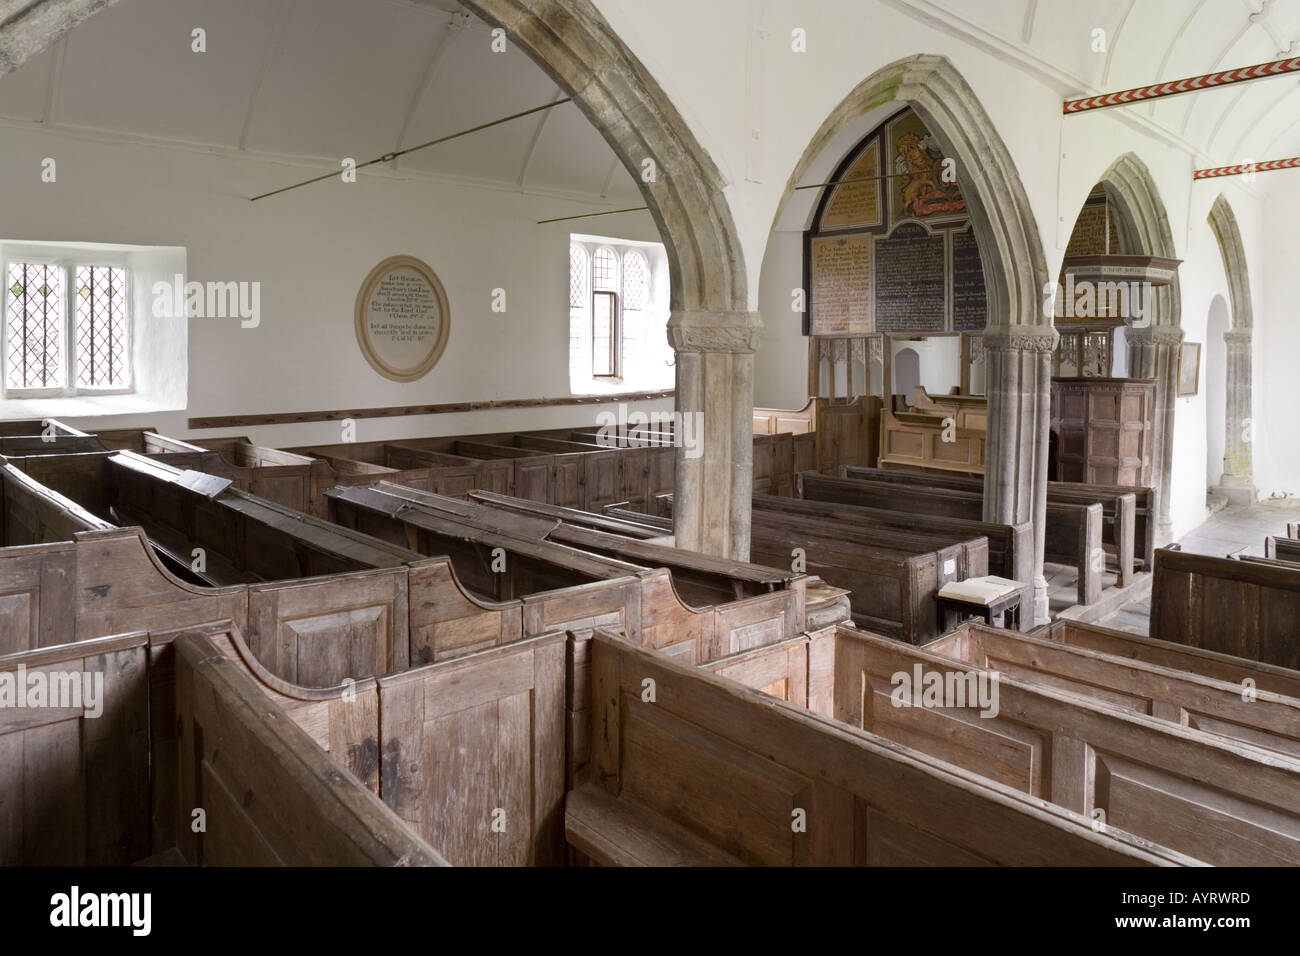 The 18th century pews and interior of the old church of St Petrock (Petroc) at Parracombe, Exmoor, Devon Stock Photo